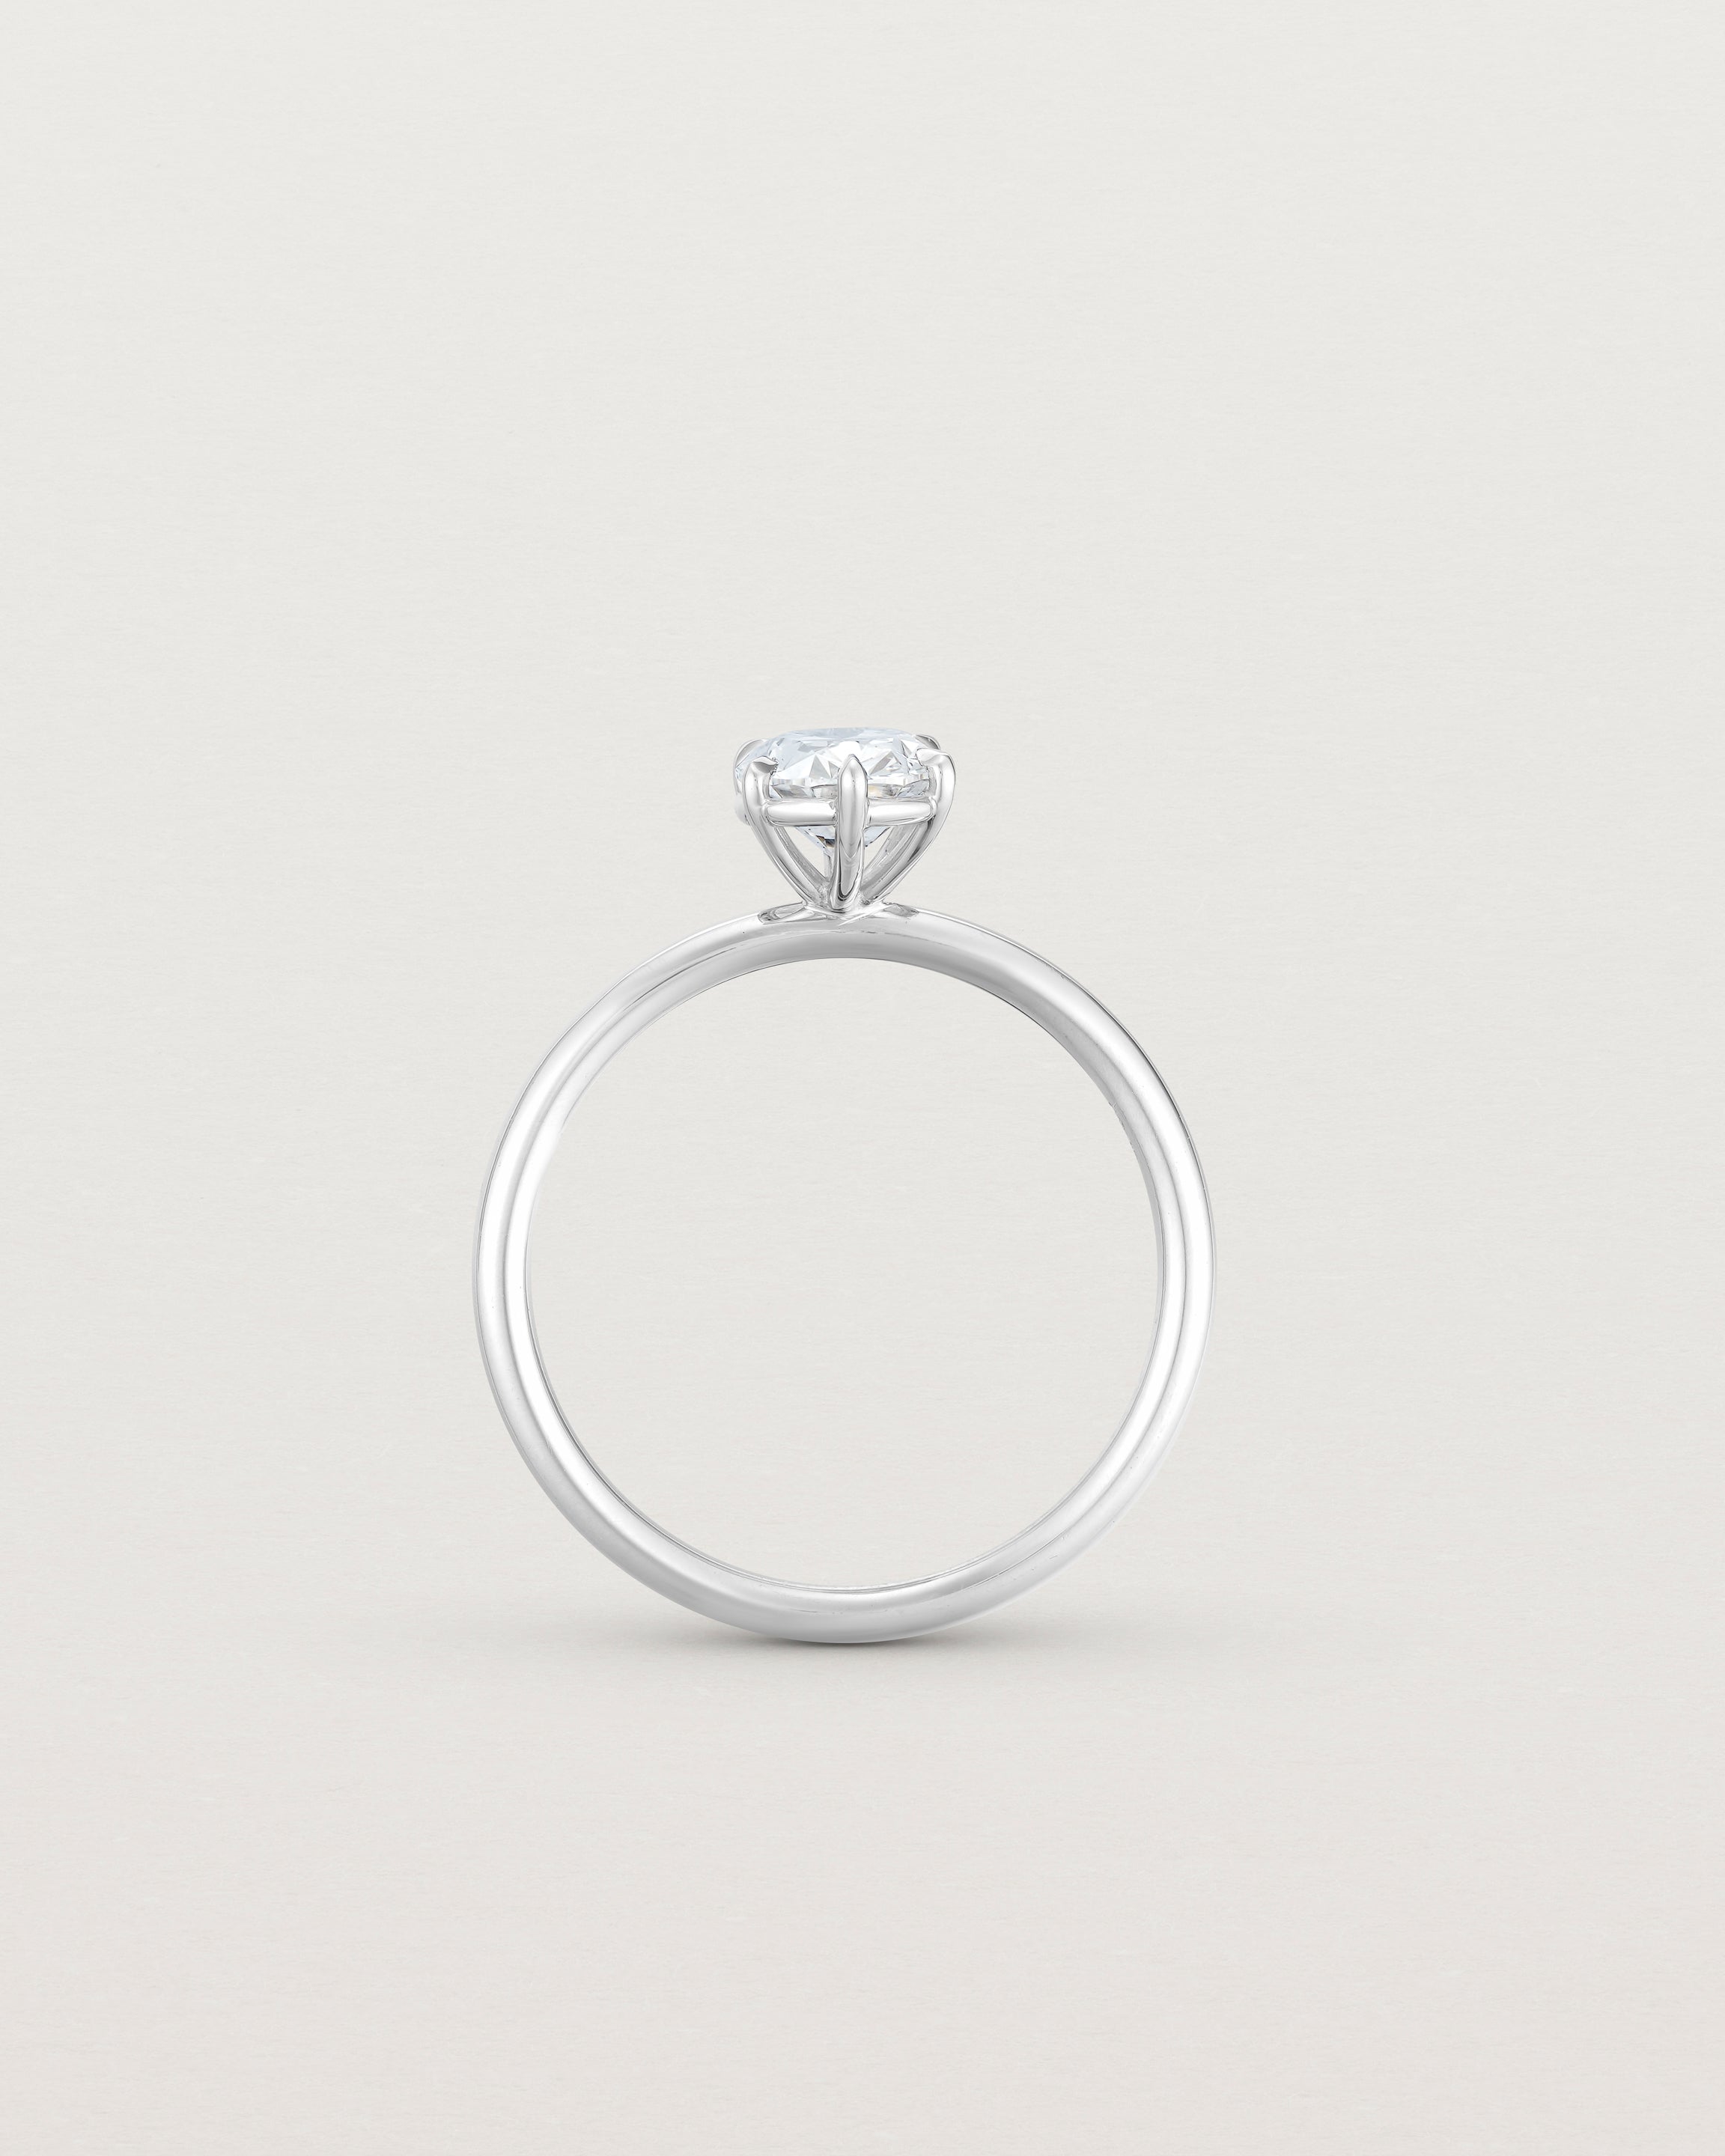 Standing view of the No. 113 Signature Solitaire | Laboratory Grown Diamond in white gold.